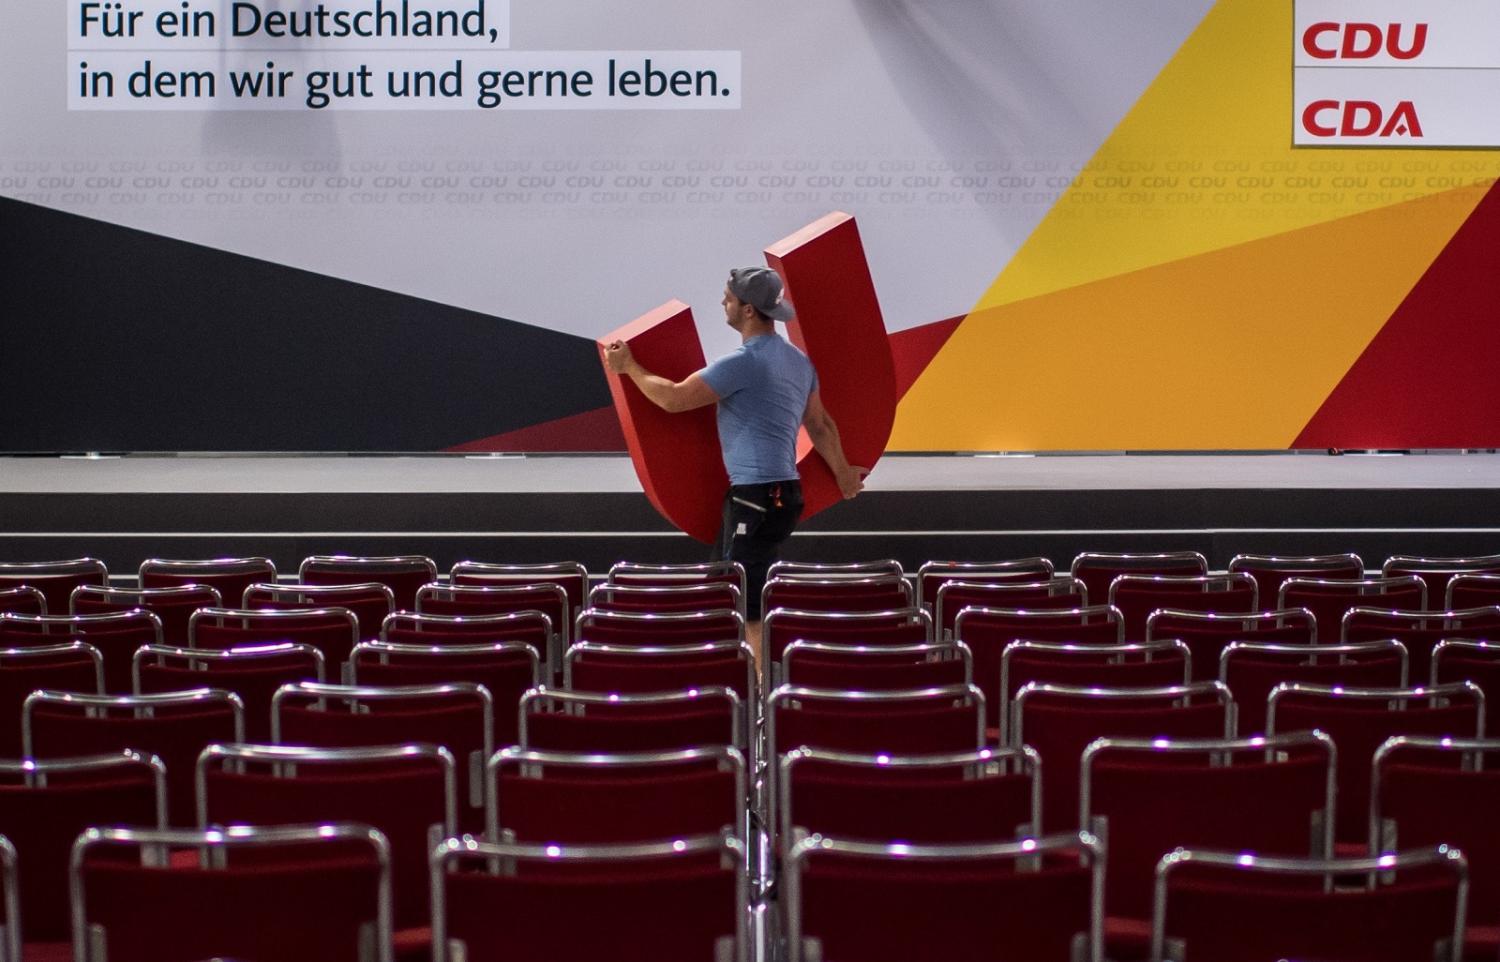 The German Christian Democrats Union (CDU) federal election campaign opening rally in Dortmund, Germany. 